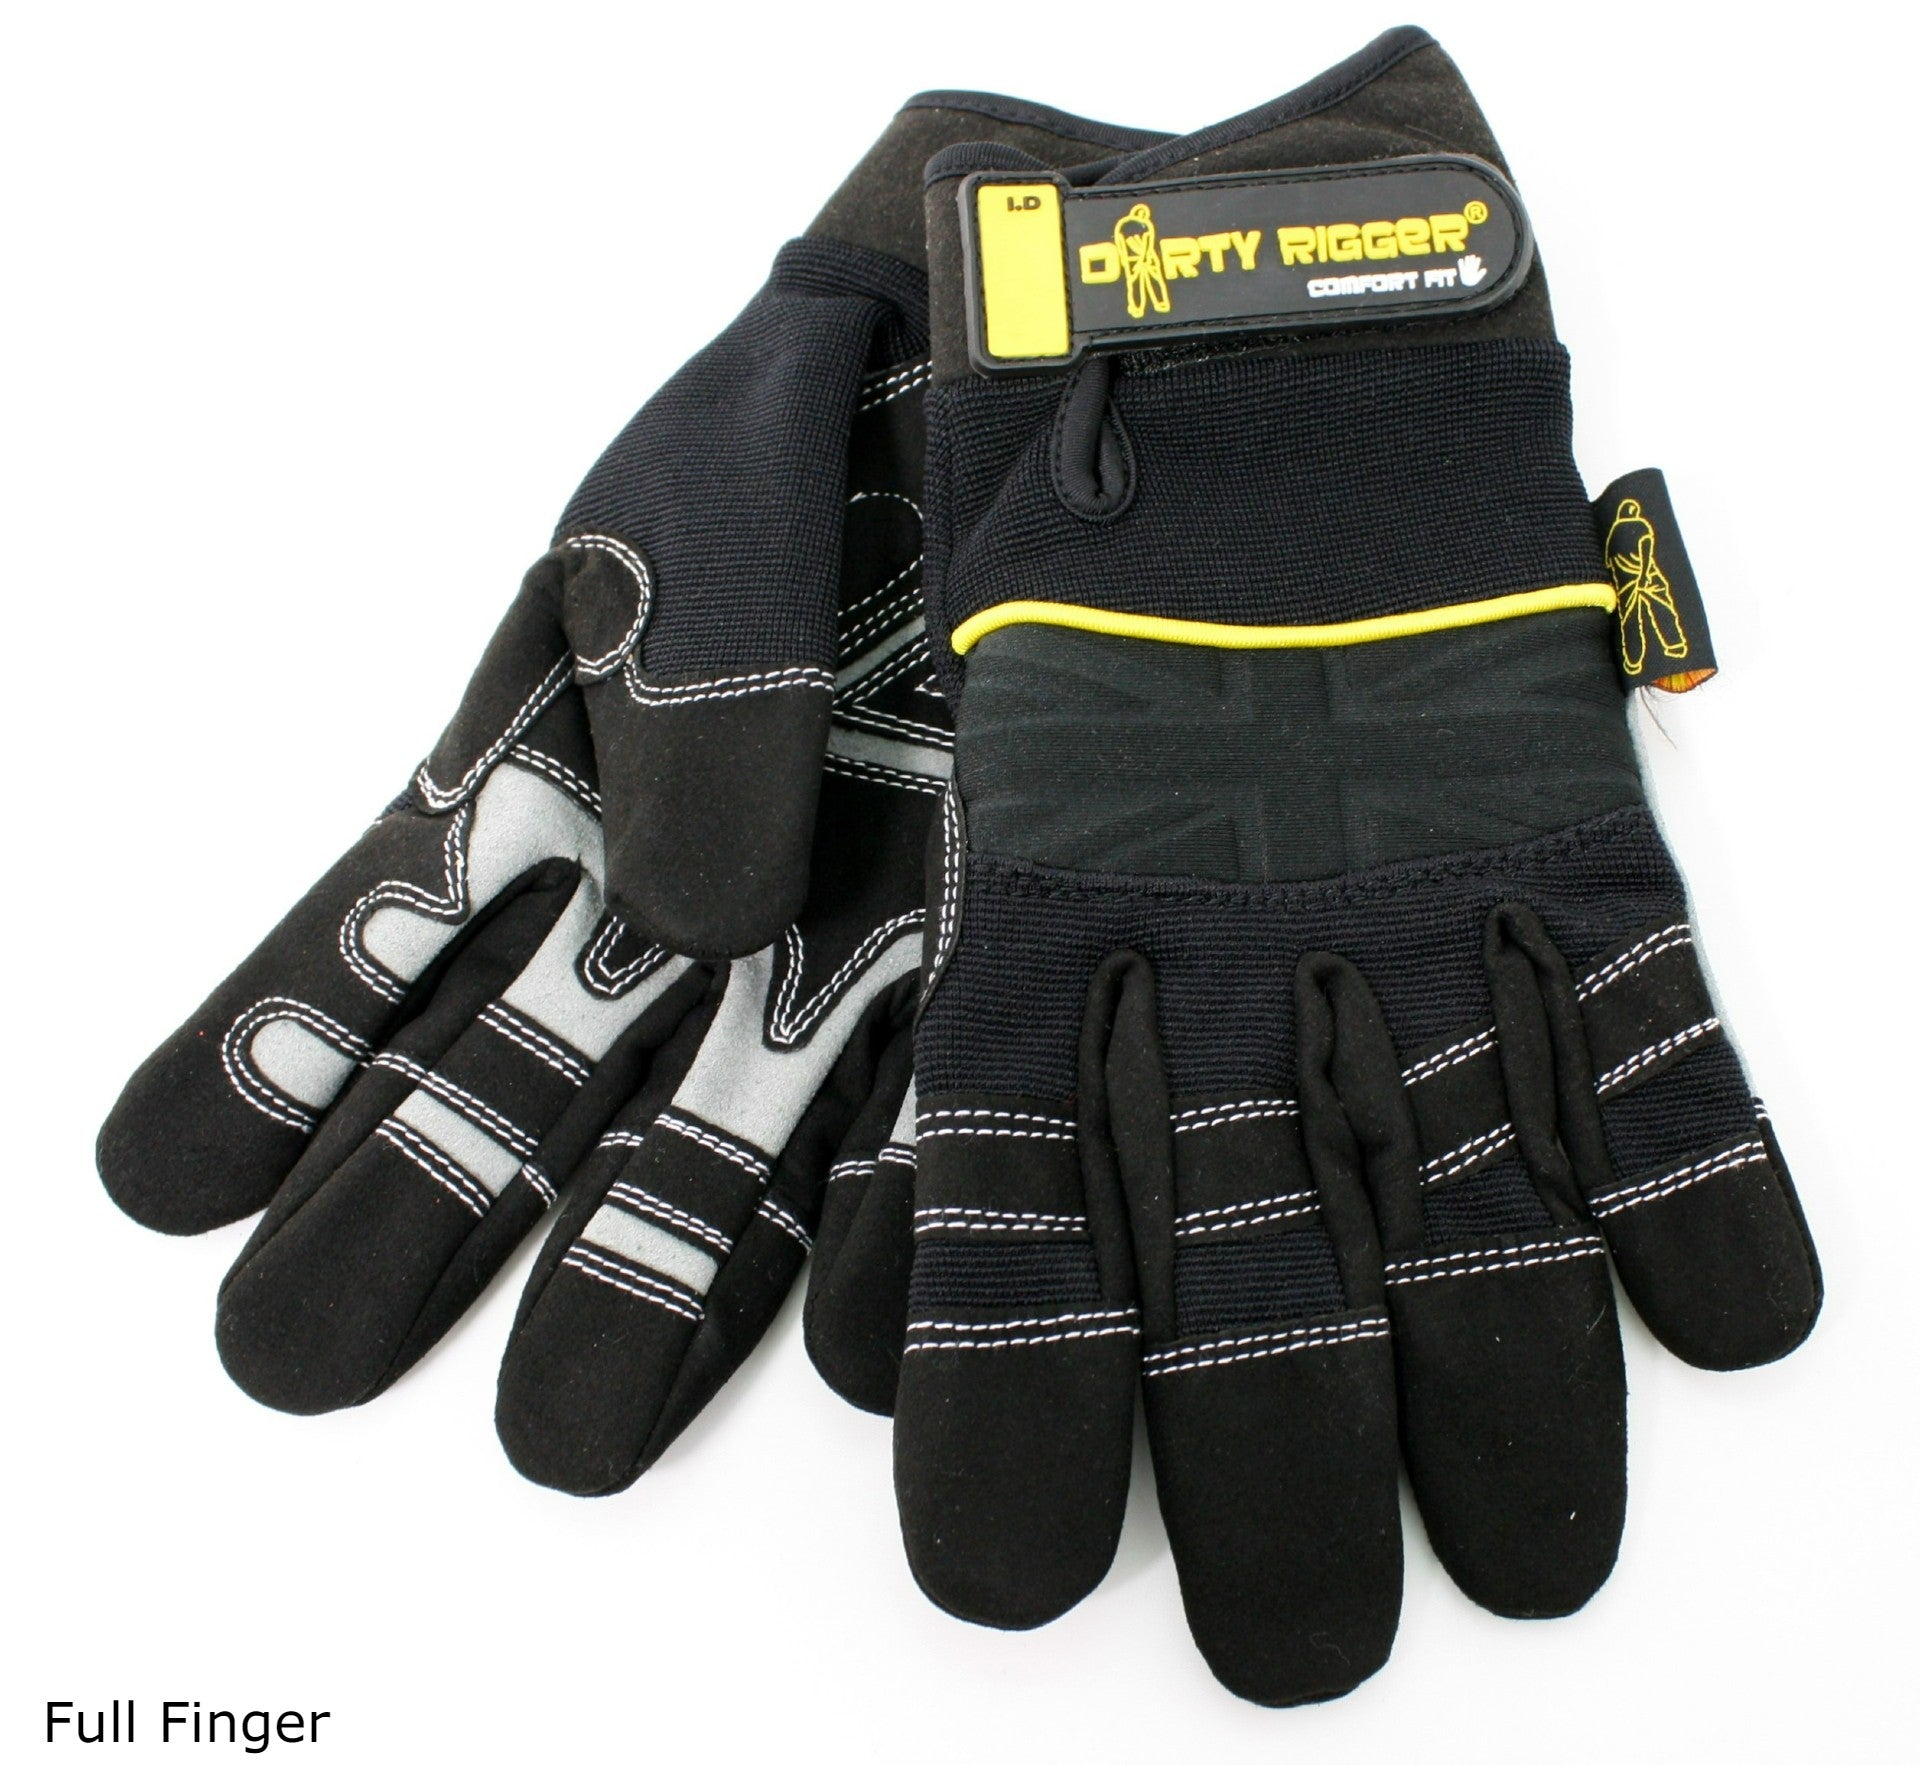 Full Finger, pair of gloves laying flat, one facing up, one facing down